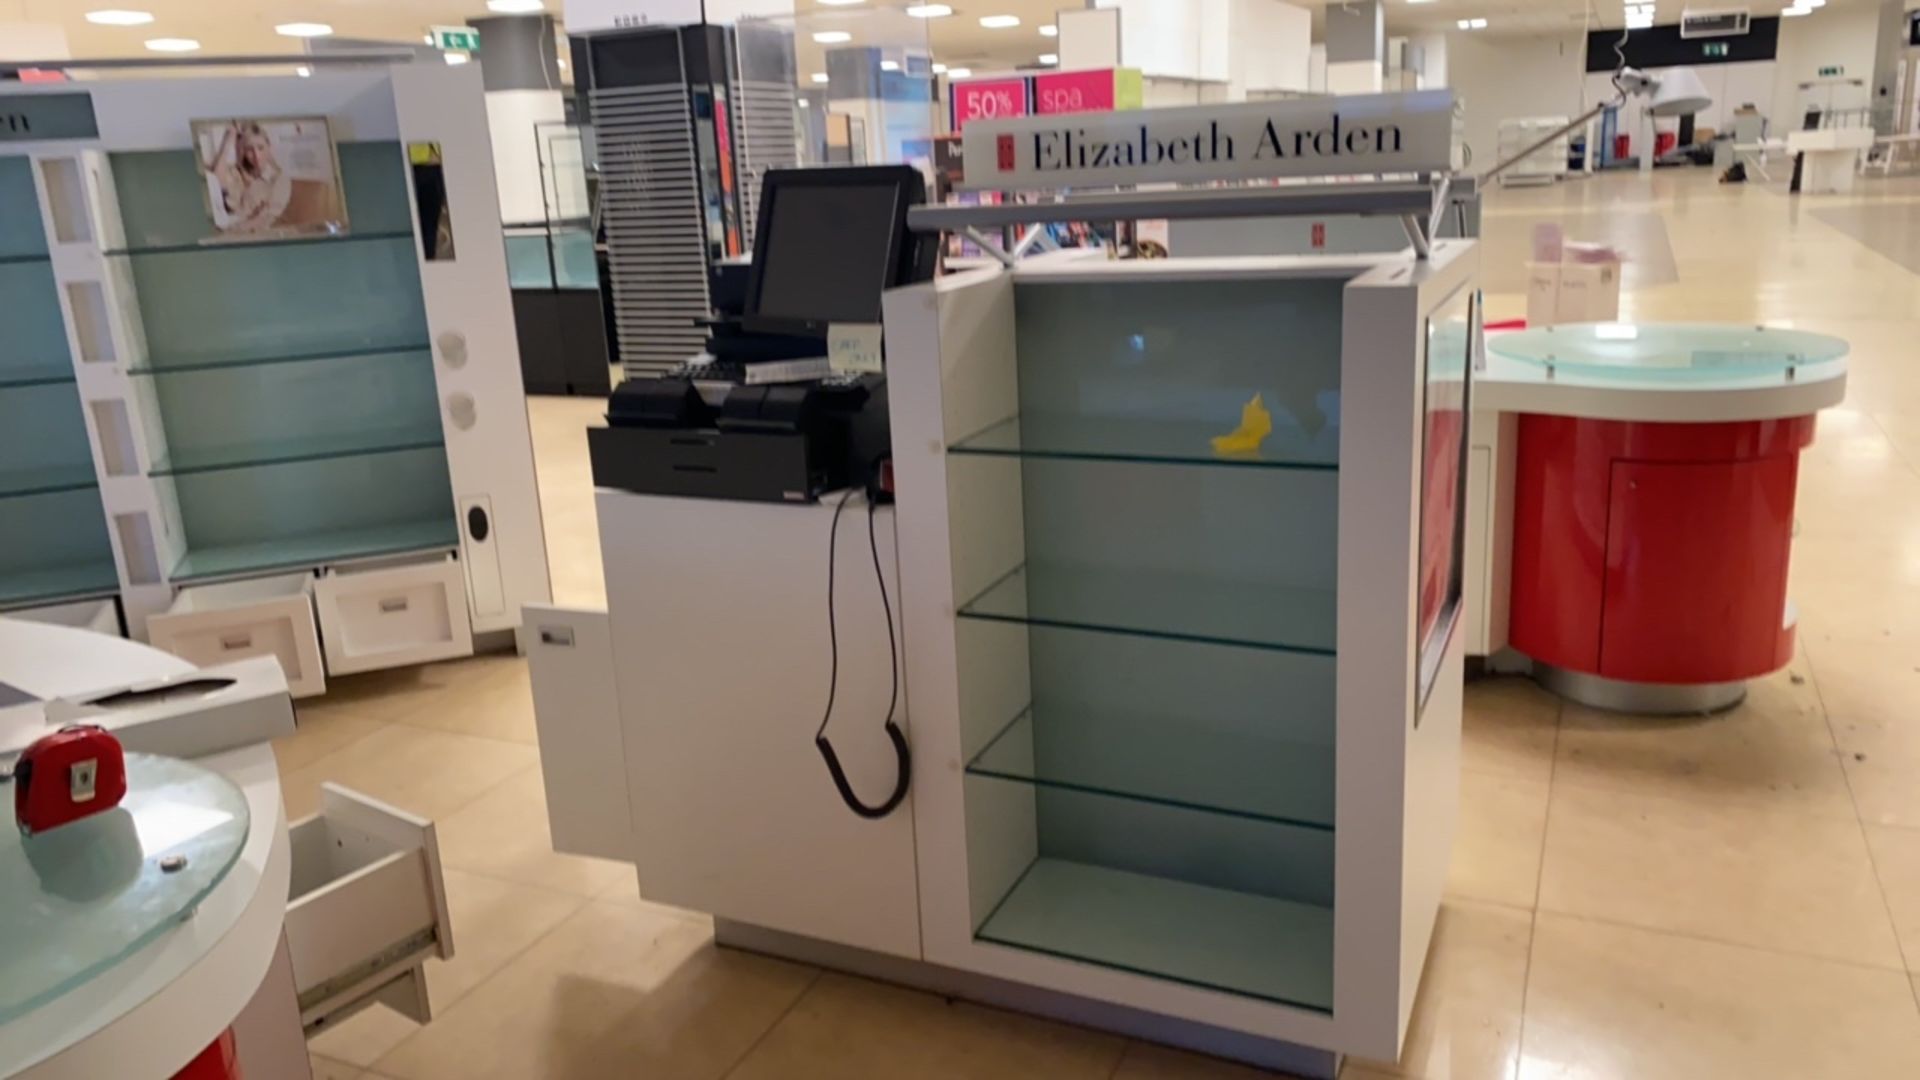 Elizabeth Arden Pay And Display Unit